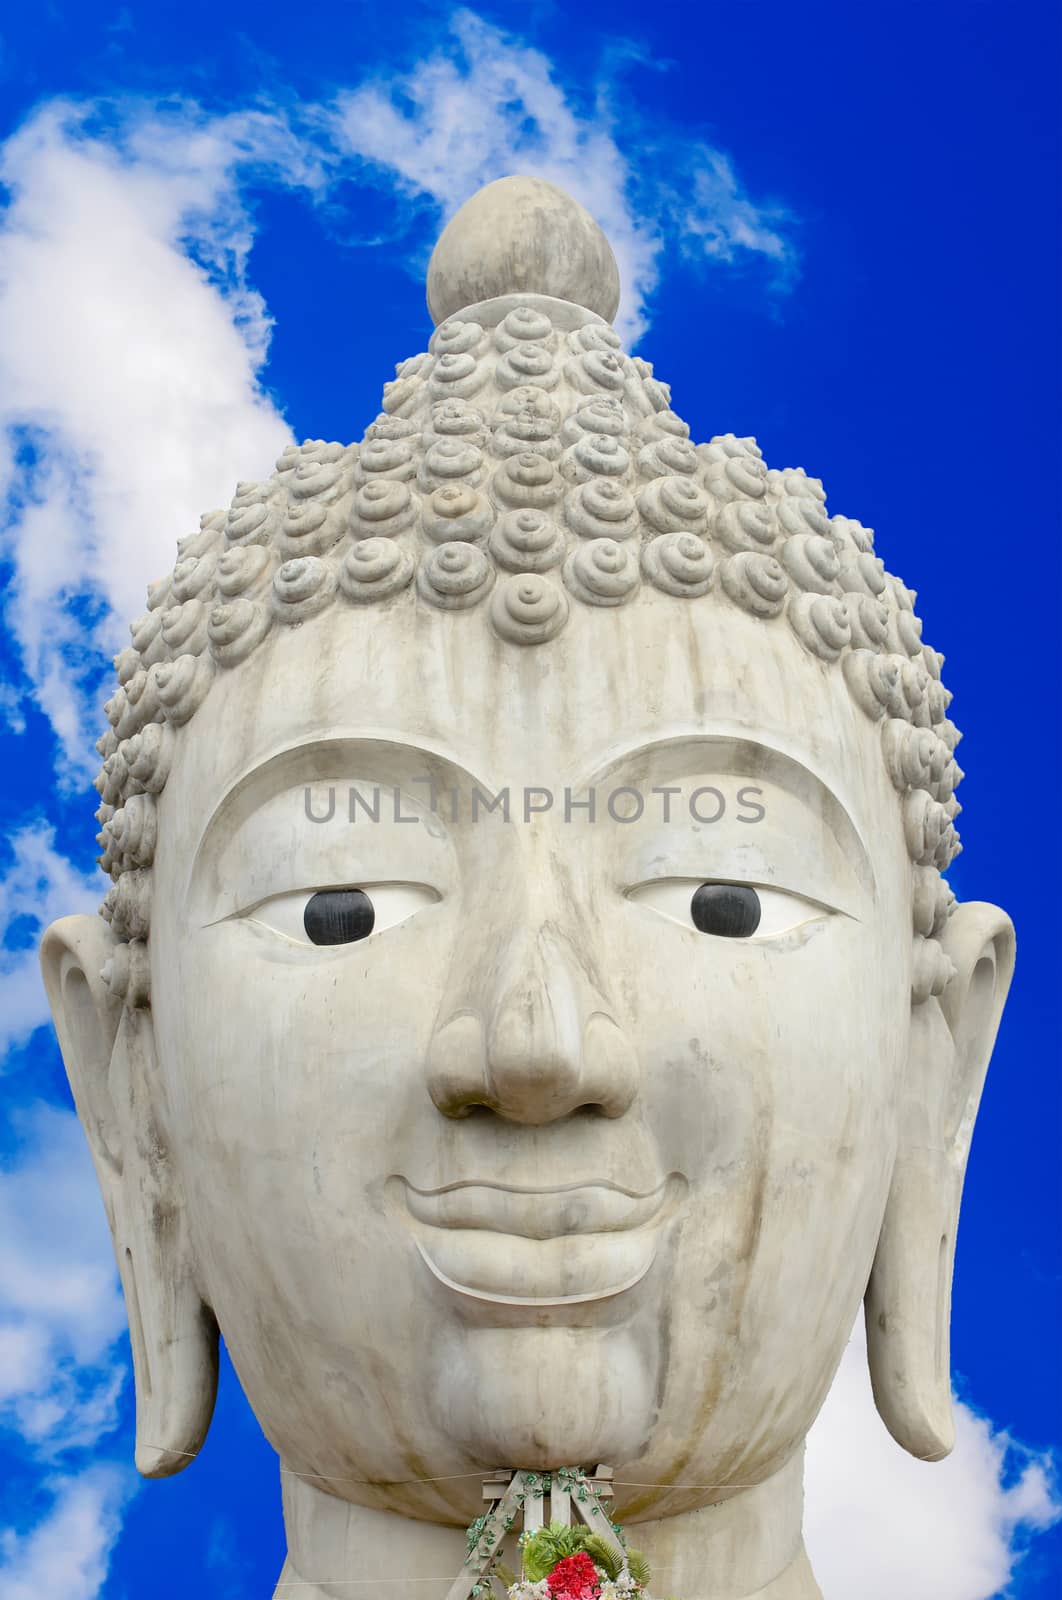 The Head of Buddha Image and Cloudy Blue Sky Background.